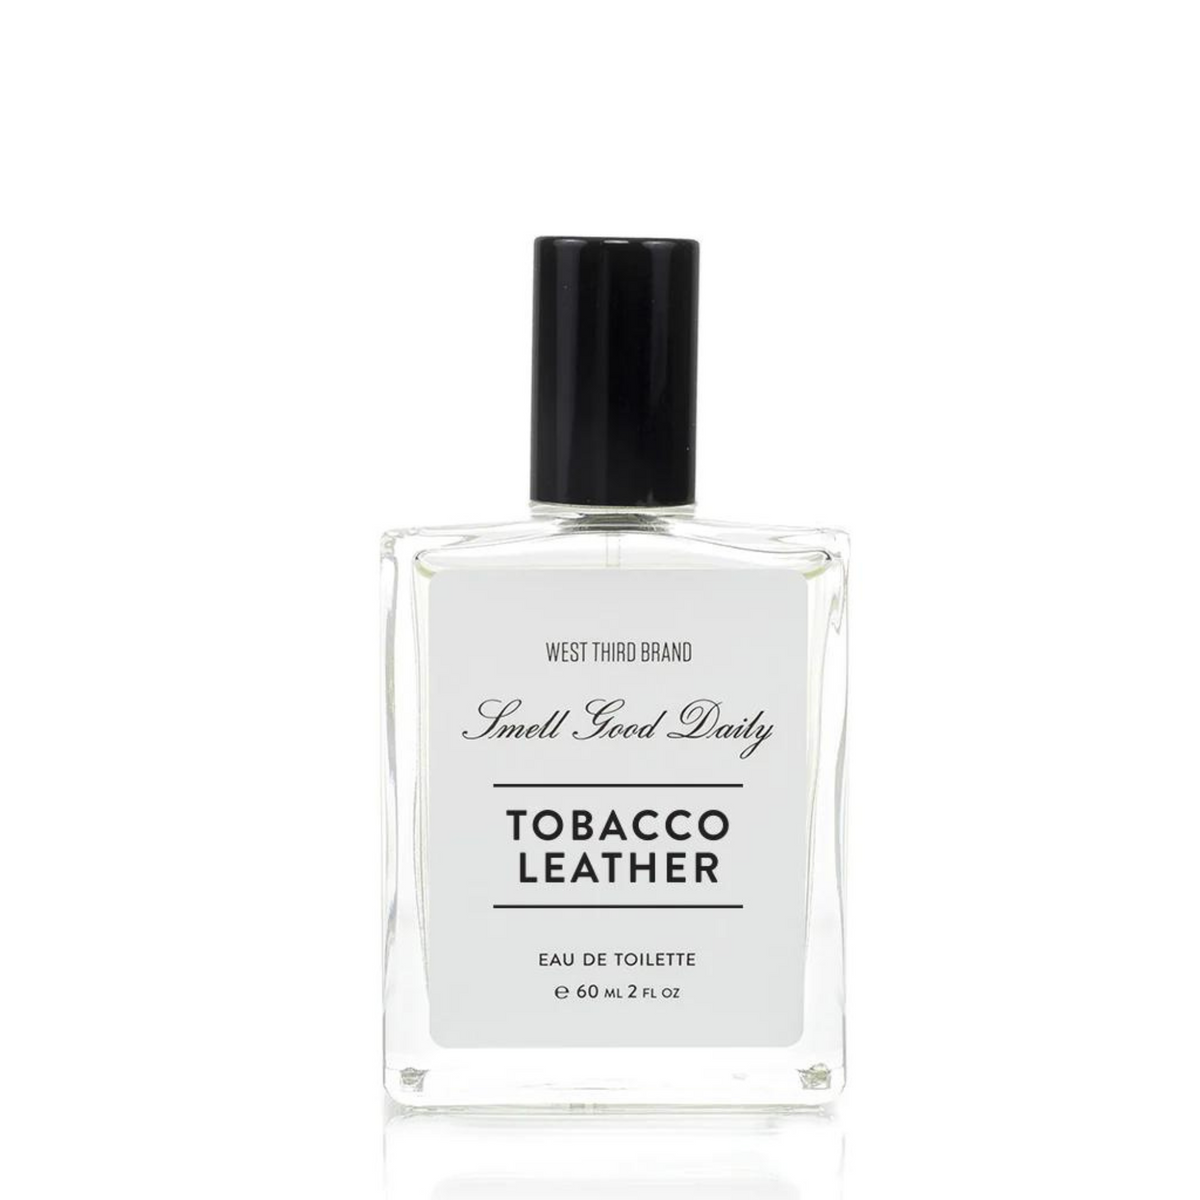 Primary Image of Tabacco Leather EDT